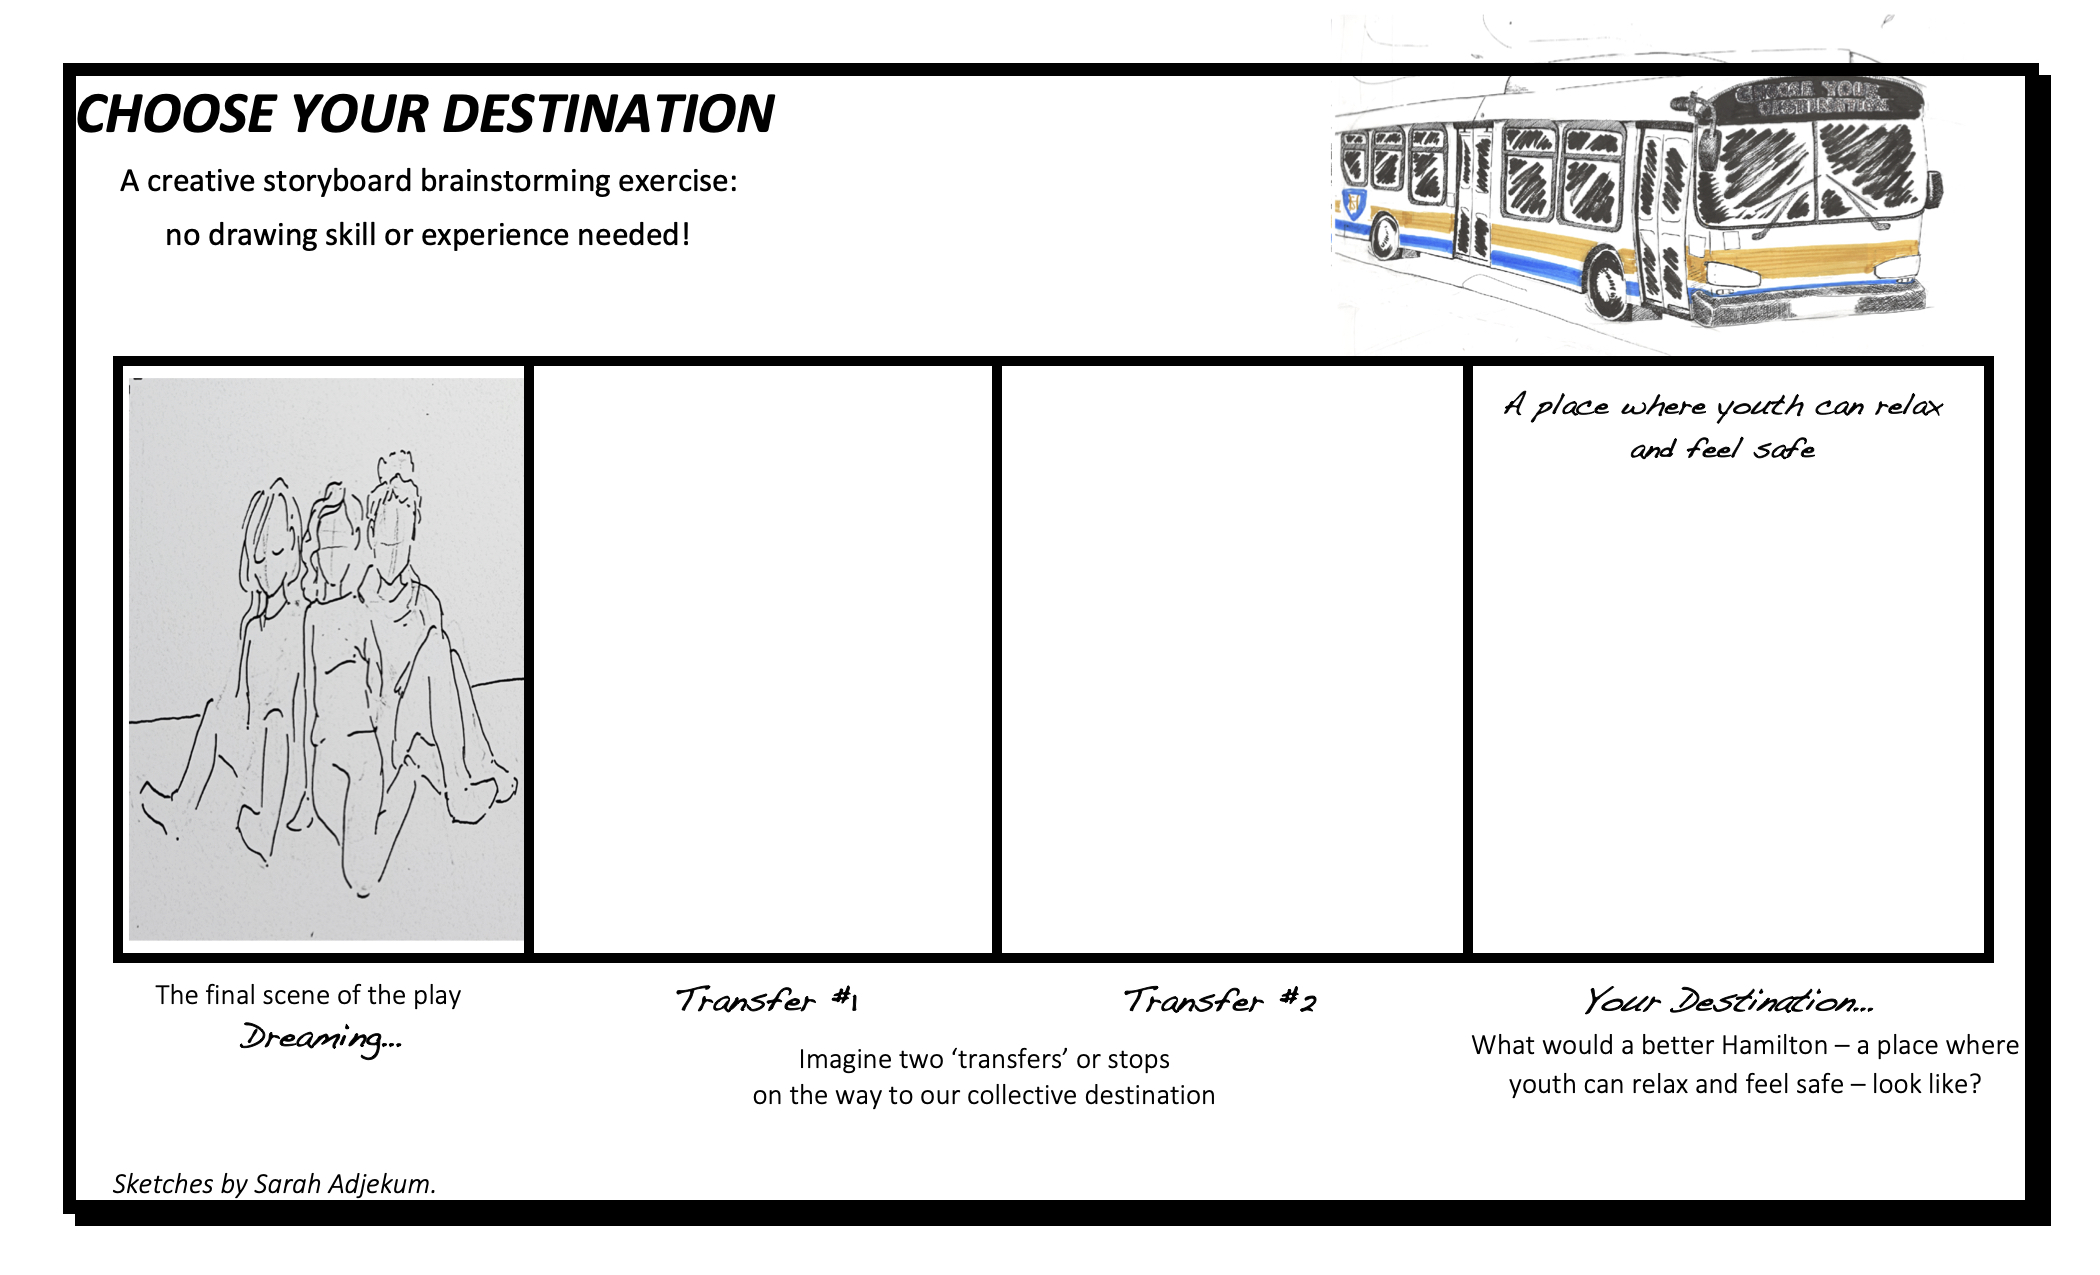 Four-panel storyboard to be used as part of the post-performance activity.